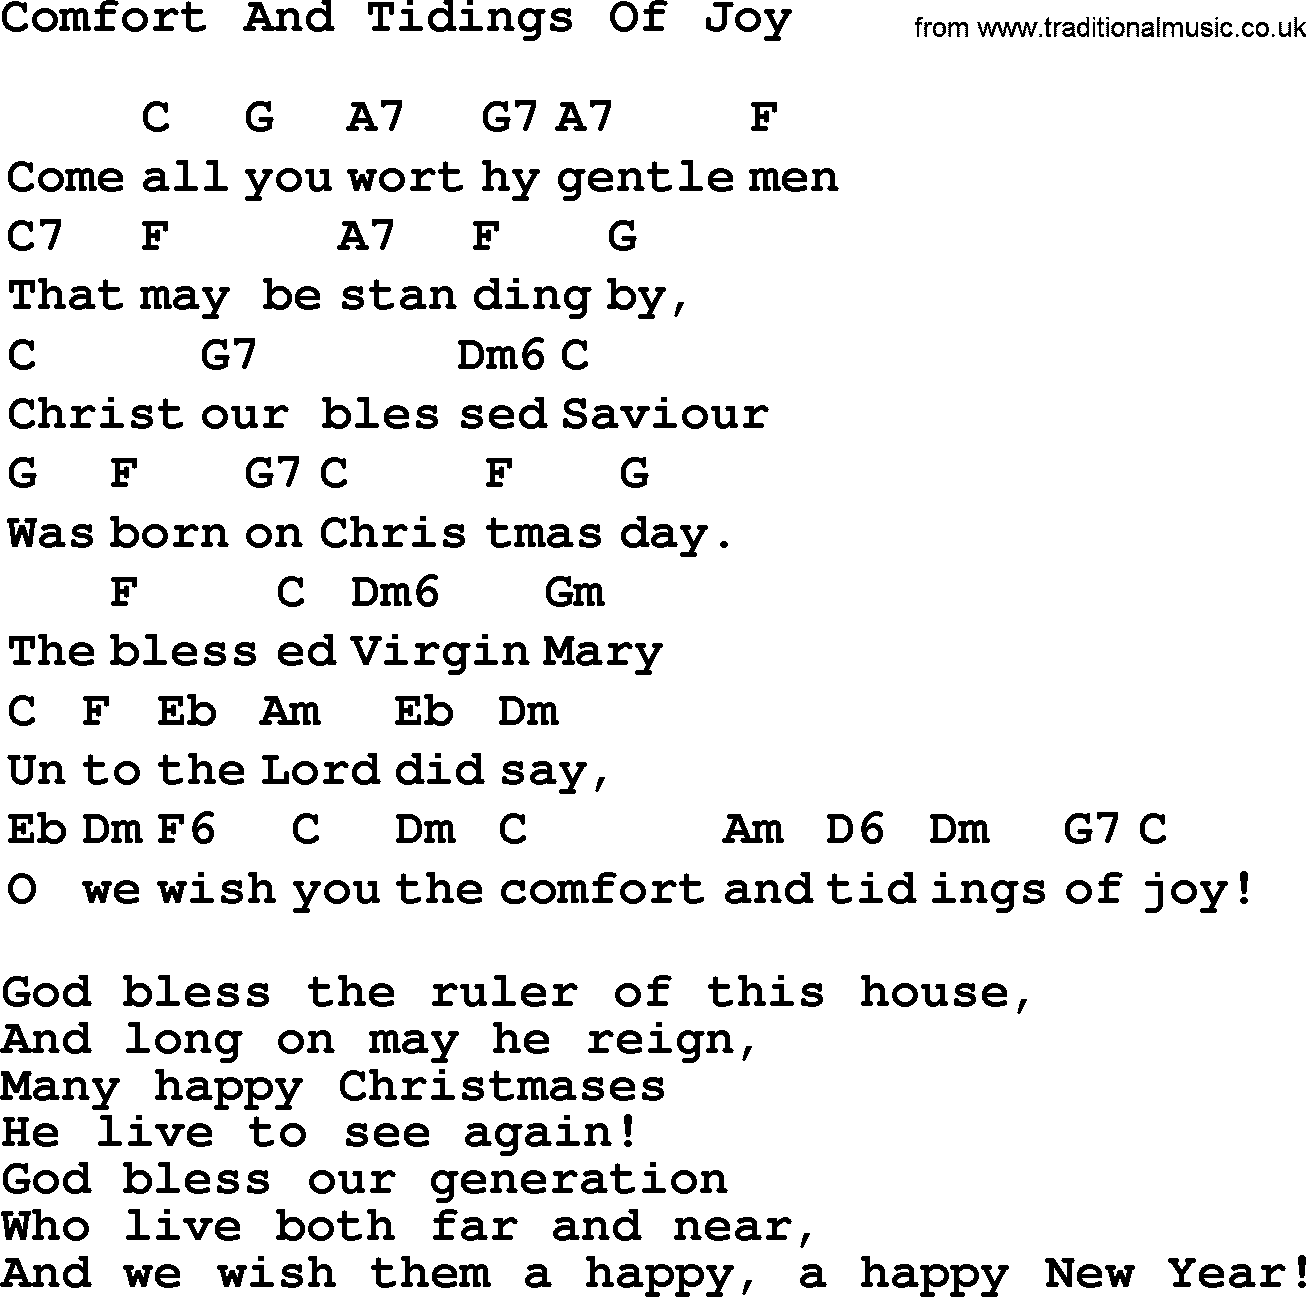 Top 1000 Most Popular Folk and Old-time Songs: Comfort And Tidings Of Joy, lyrics and chords